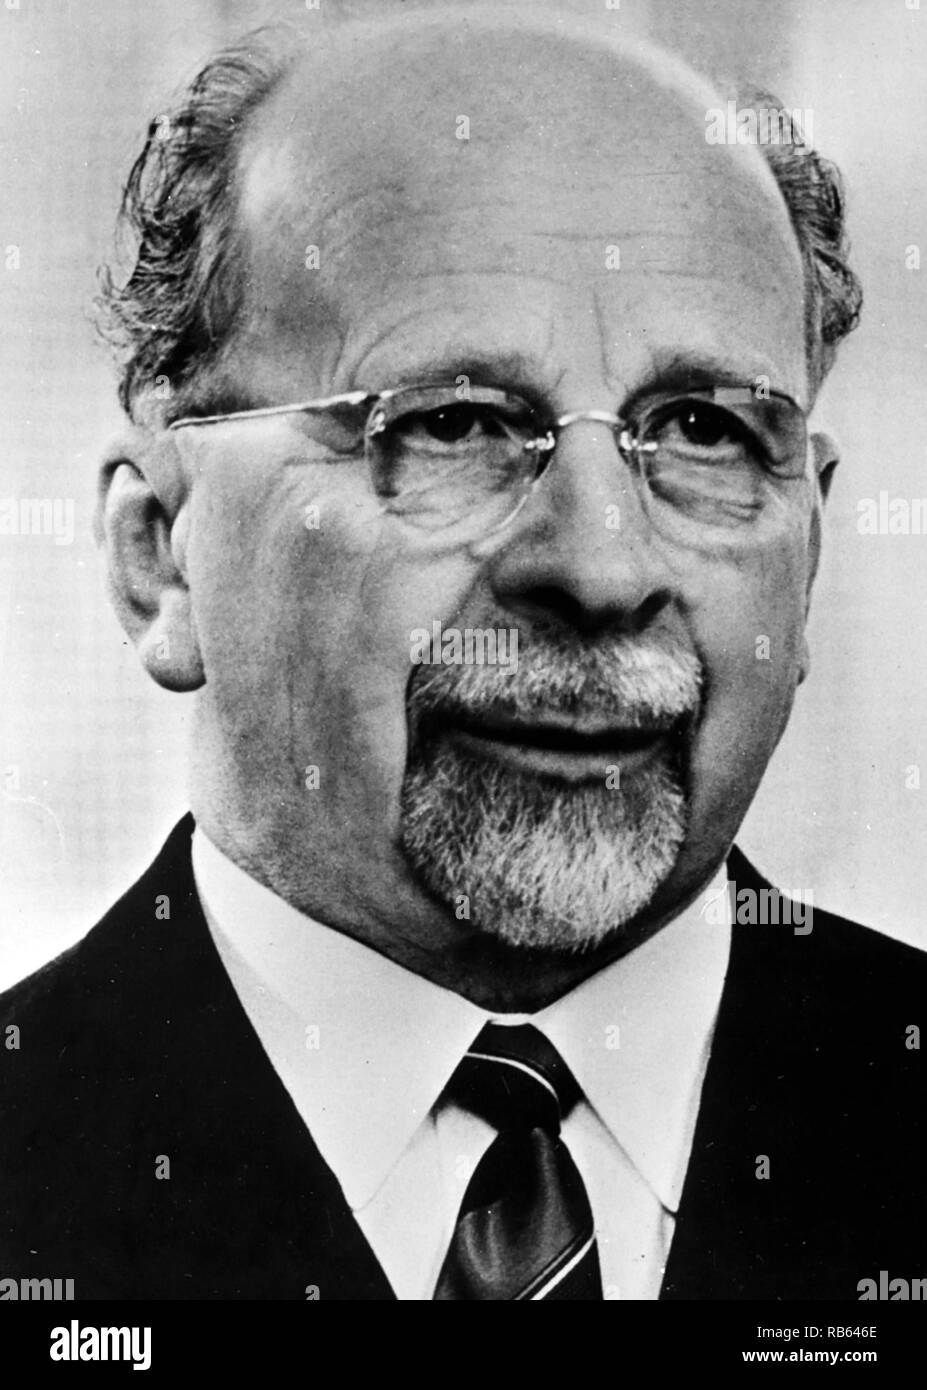 Walter Ulbricht (30 June 1893 - 1 August 1973) German communist politician. He played a leading role in the creation of the Weimar-era Communist Party of Germany (KPD). He was first secretary of the Socialist Unity Party, and as such the actual leader of East Germany, from 1950 to 1971. From President Wilhelm Pieck's death in 1960, Stock Photo